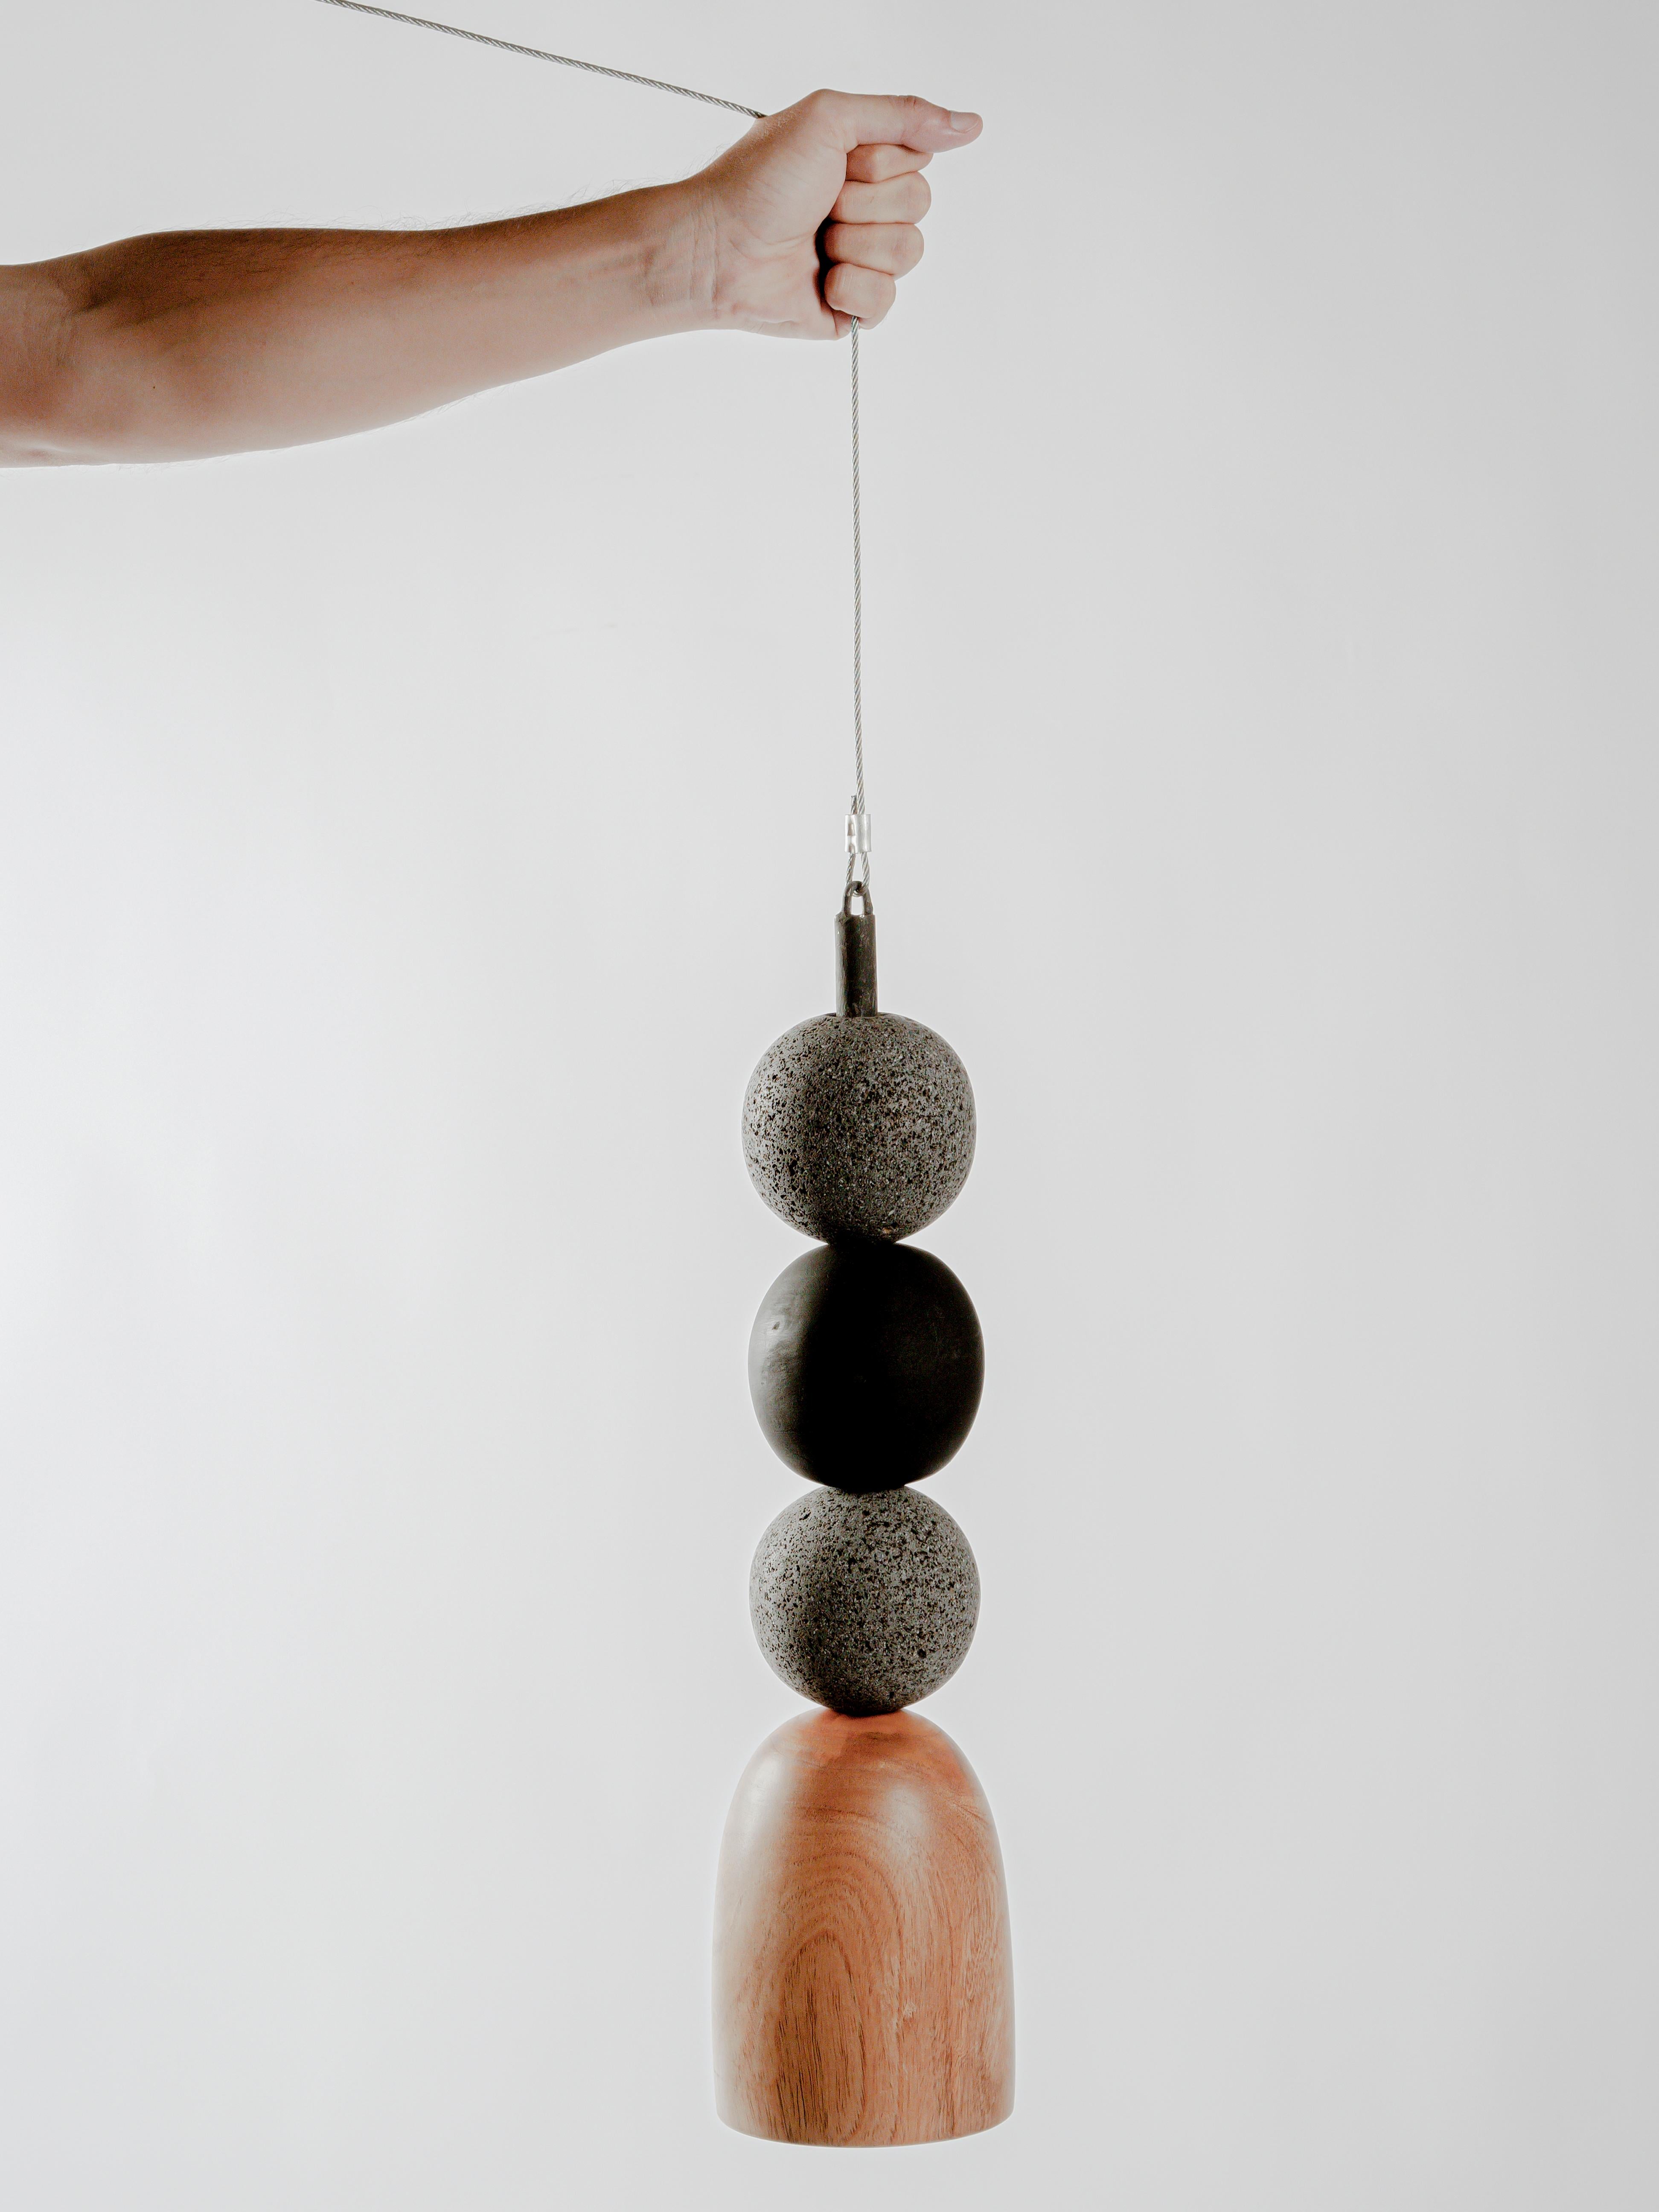 Volcanic Stone and Burned Wooden Spheres Pendant Lamp by Daniel Orozco.
Dimensions: D 13 x H 50 cm.
Materials: Jabin wood, burned wood, volcanic stone.
All our lamps can be wired according to each country. If sold to the USA it will be wired for